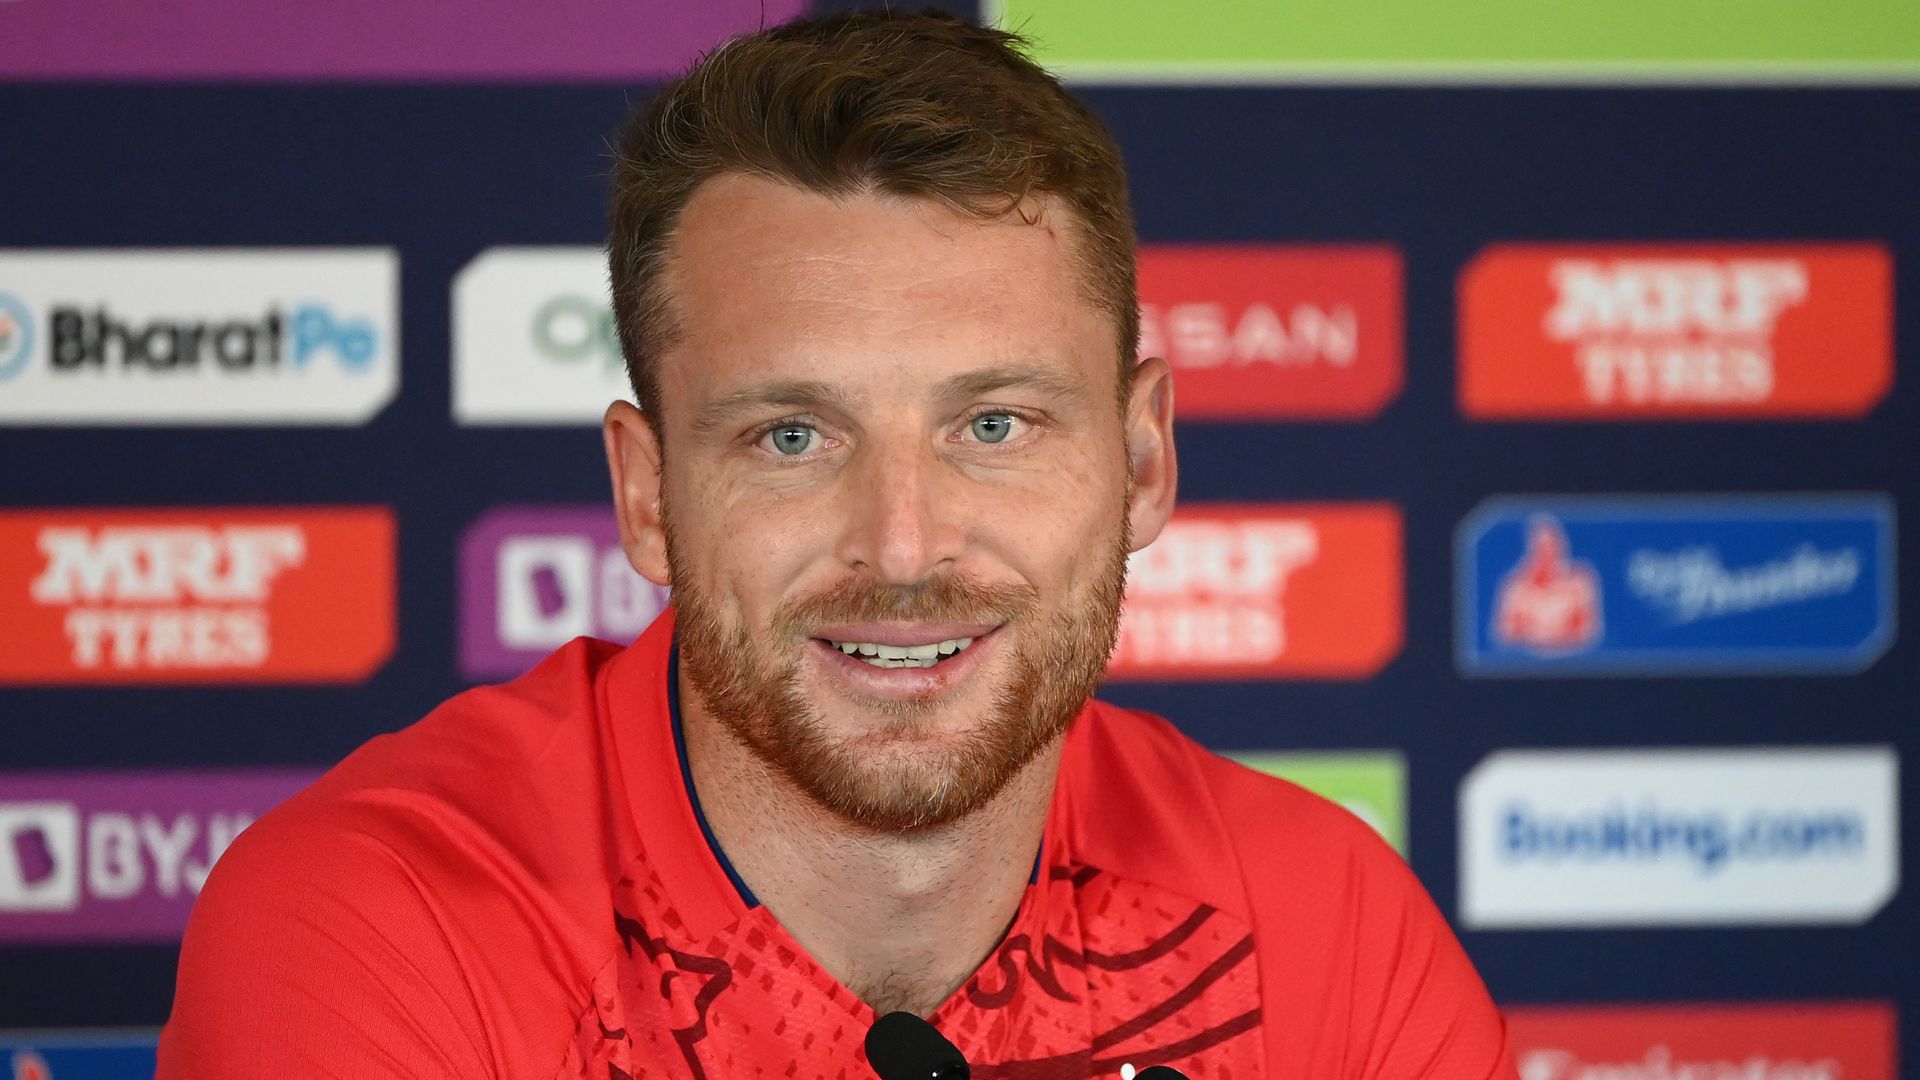 Buttler: I've dreamed about lifting World Cup | Wood could play in final